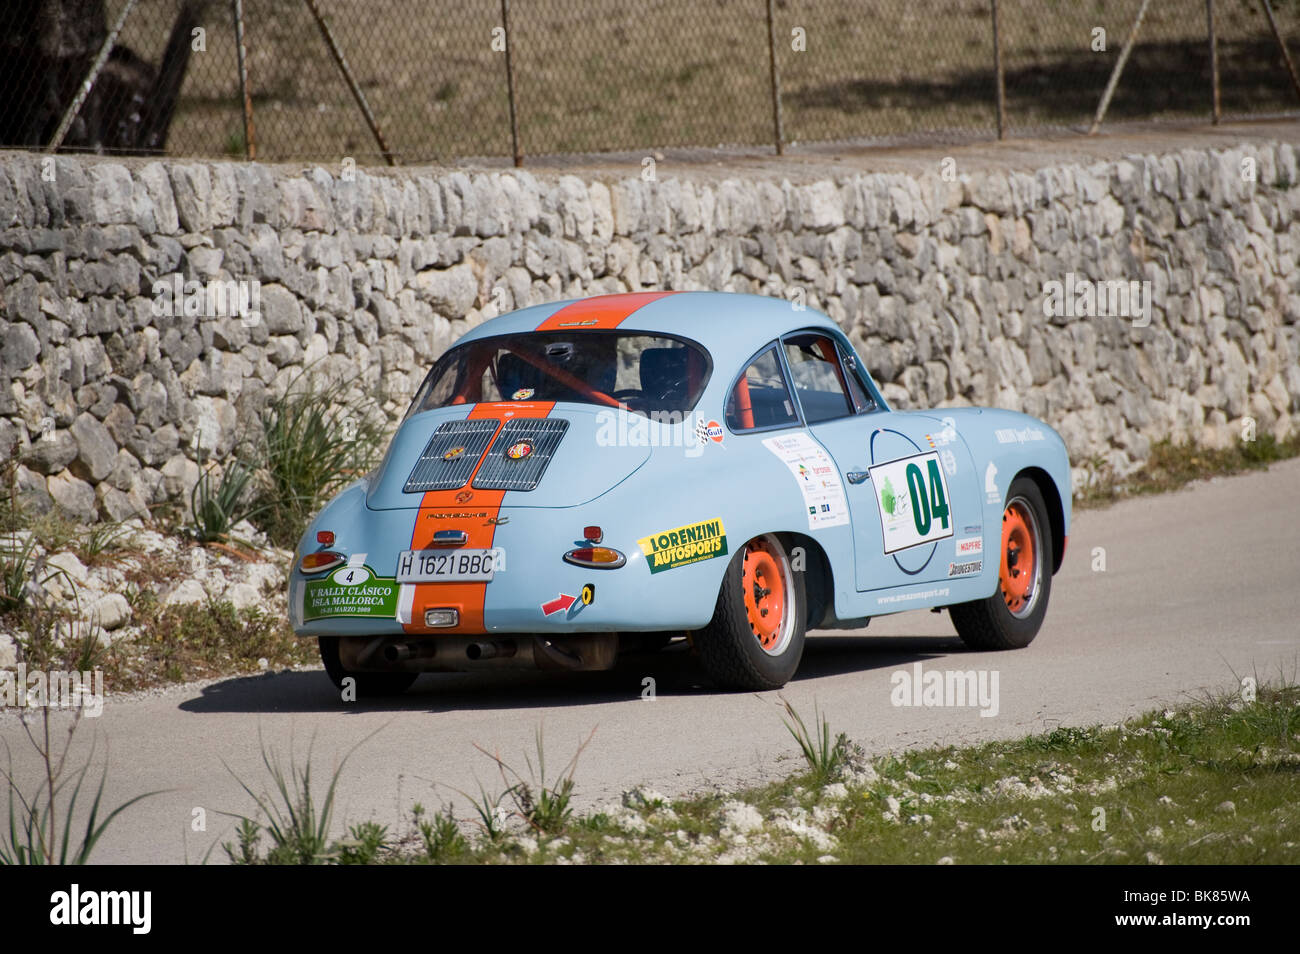 1963 Porsche 356 Roadster. Gulf racing colours classic sports car taking part in a rally in Spain. Stock Photo